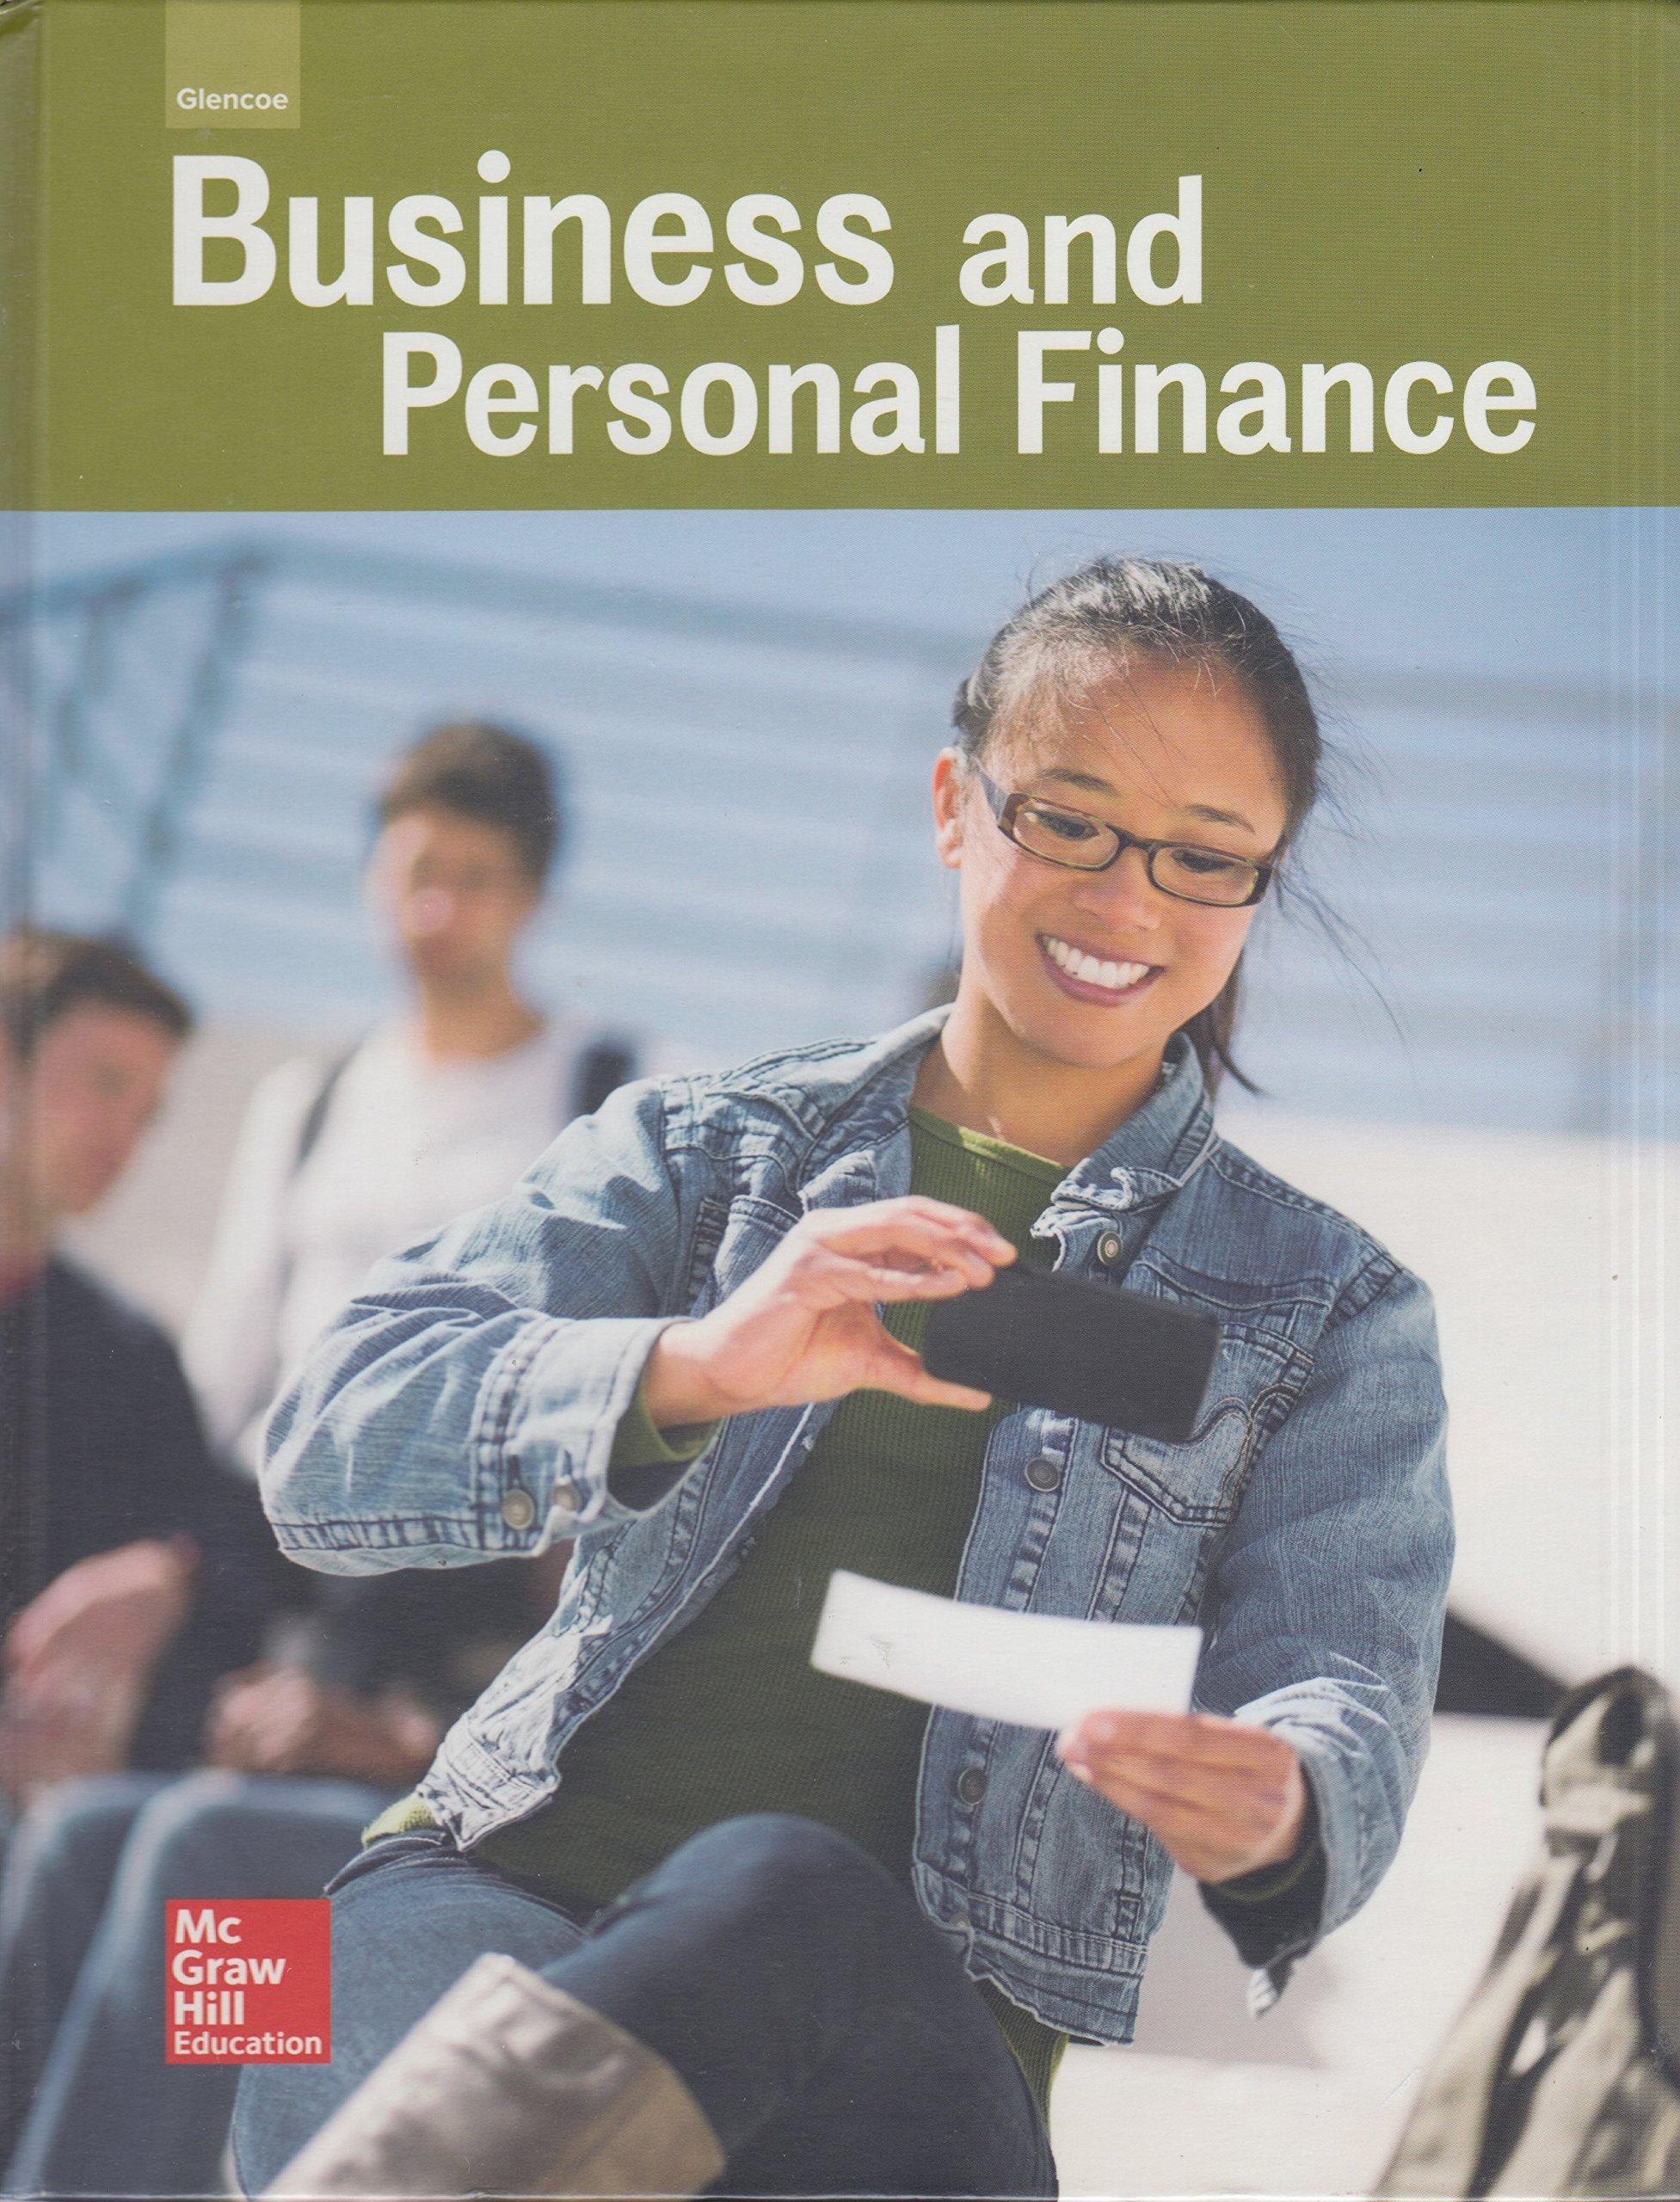 glencoe business and personal finance 1st edition mcgraw-hill 0021400202, 9780021400201